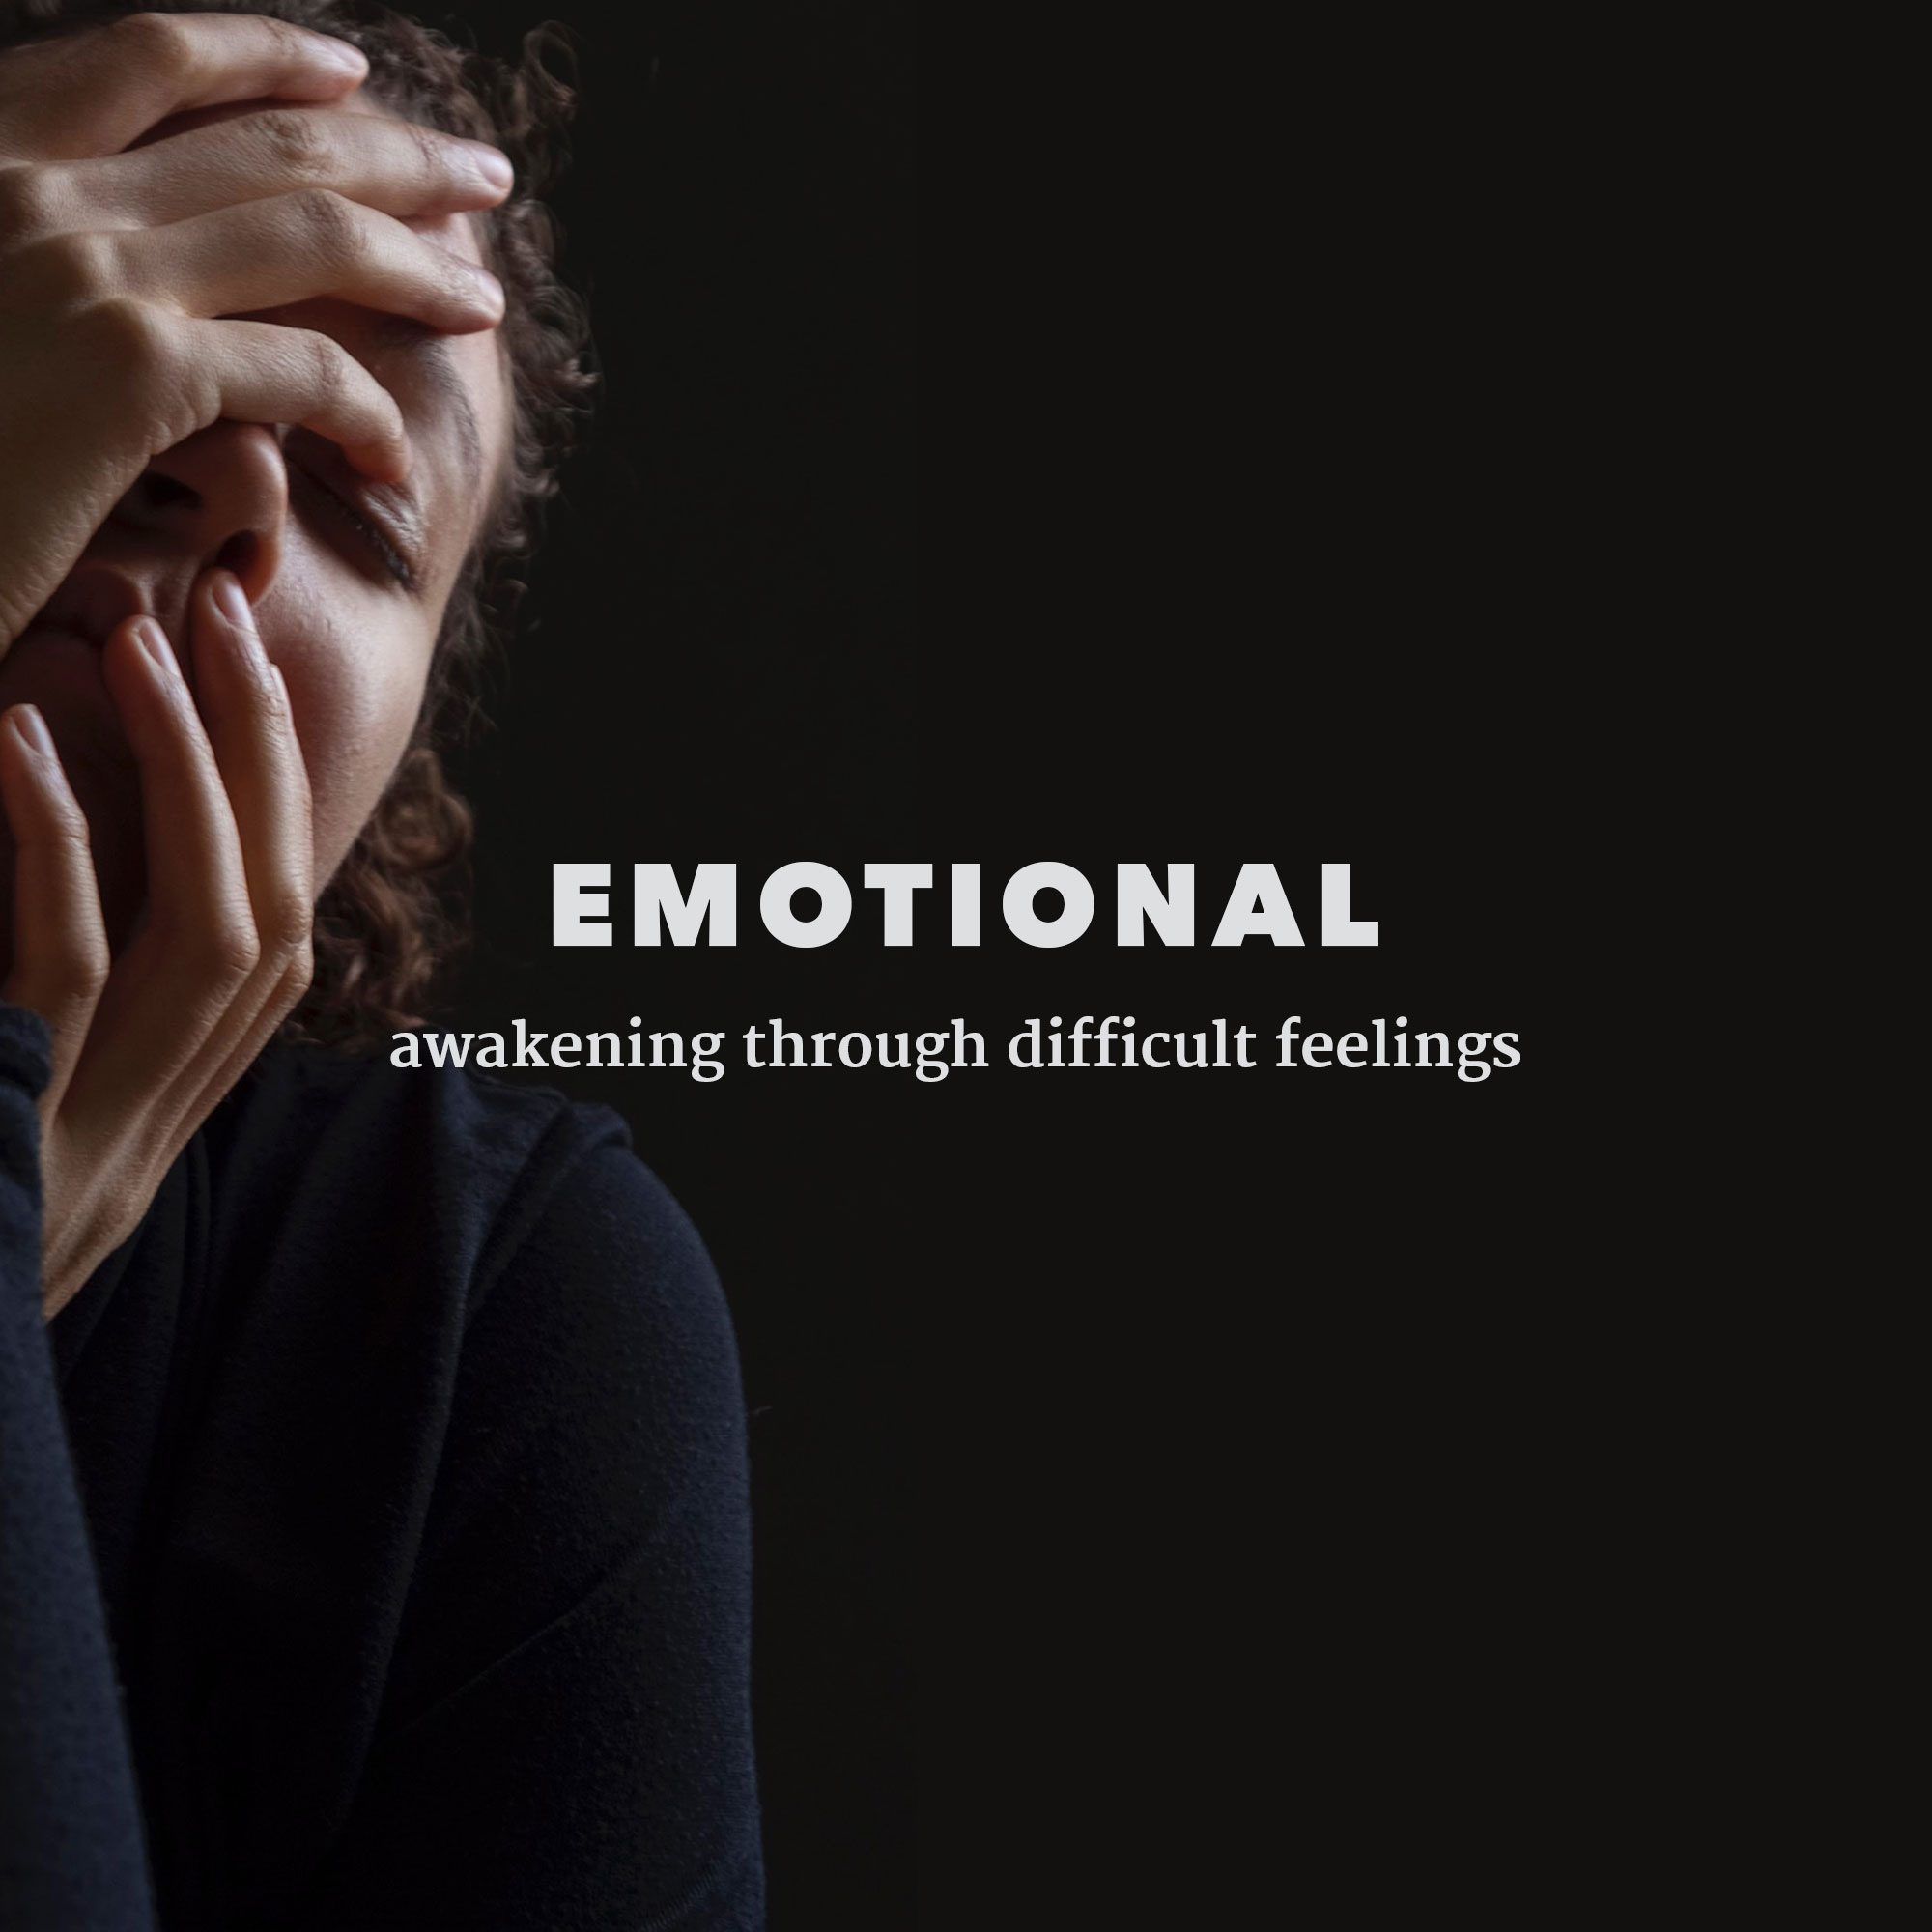 EMOTIONAL ~ reactions that create suffering